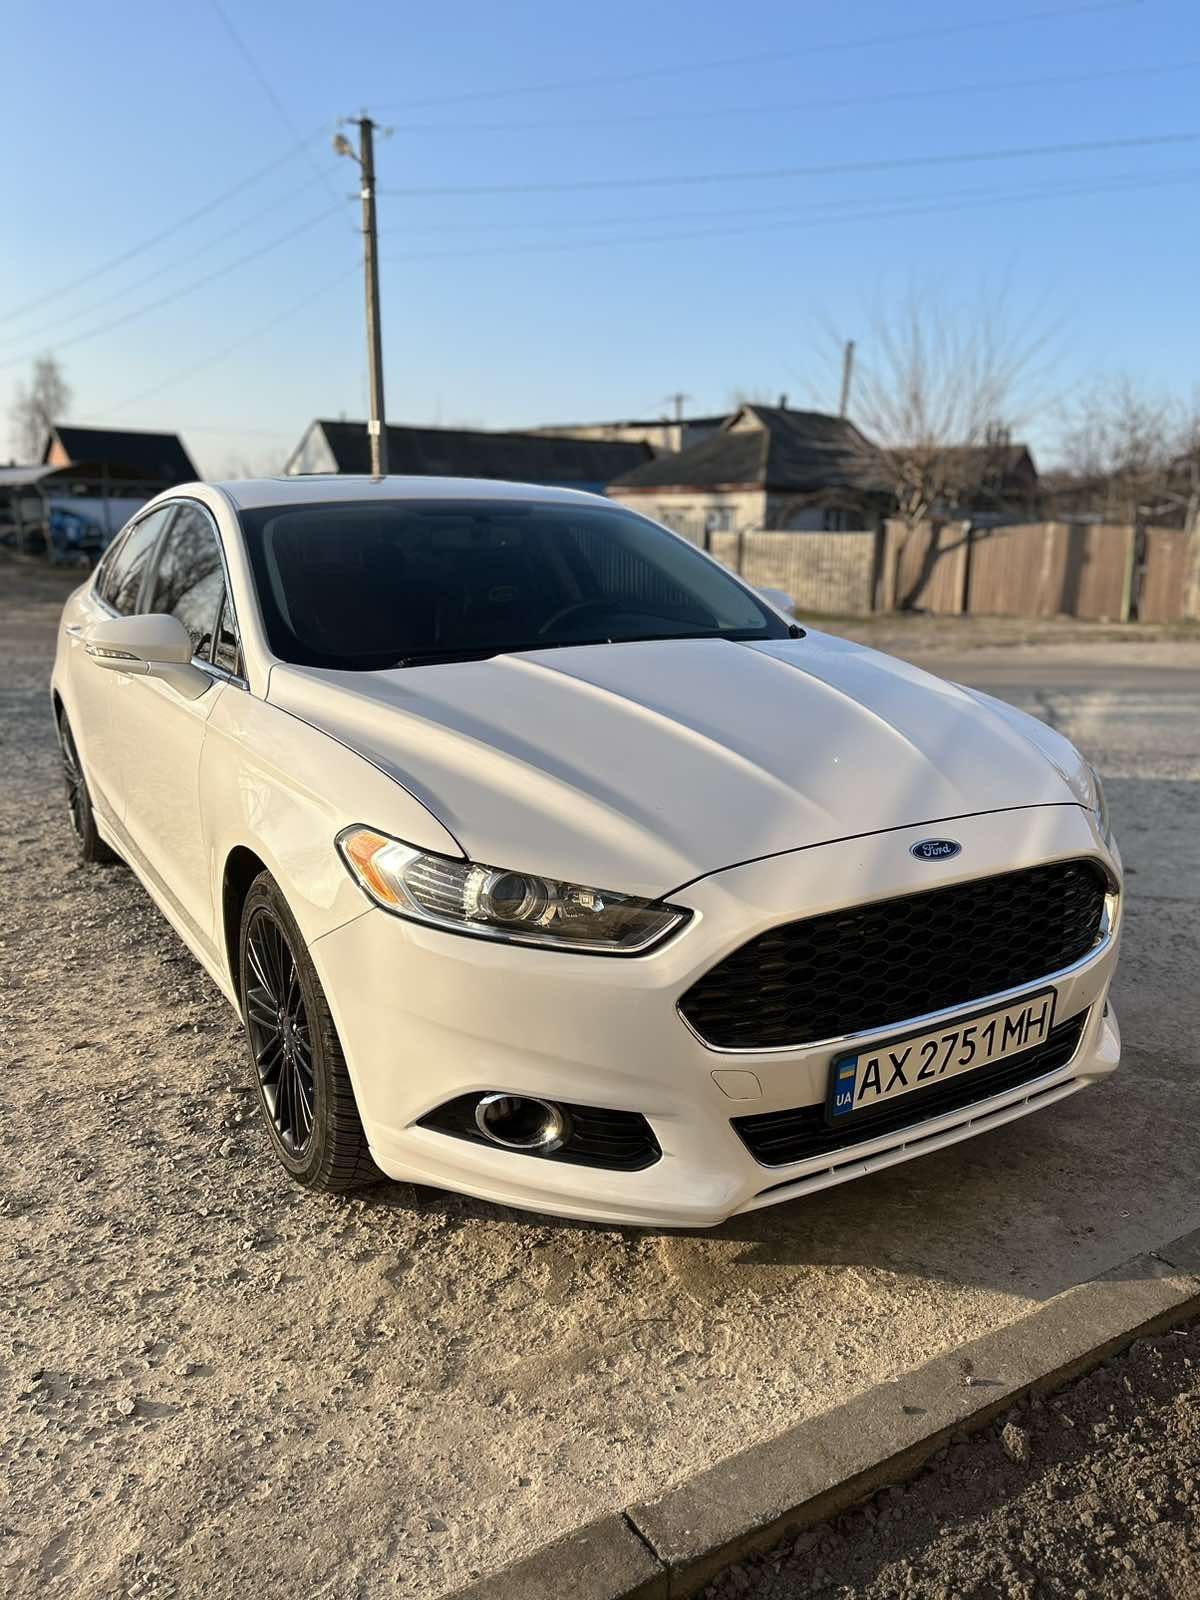 Ford fusion 2.0 ecoboost